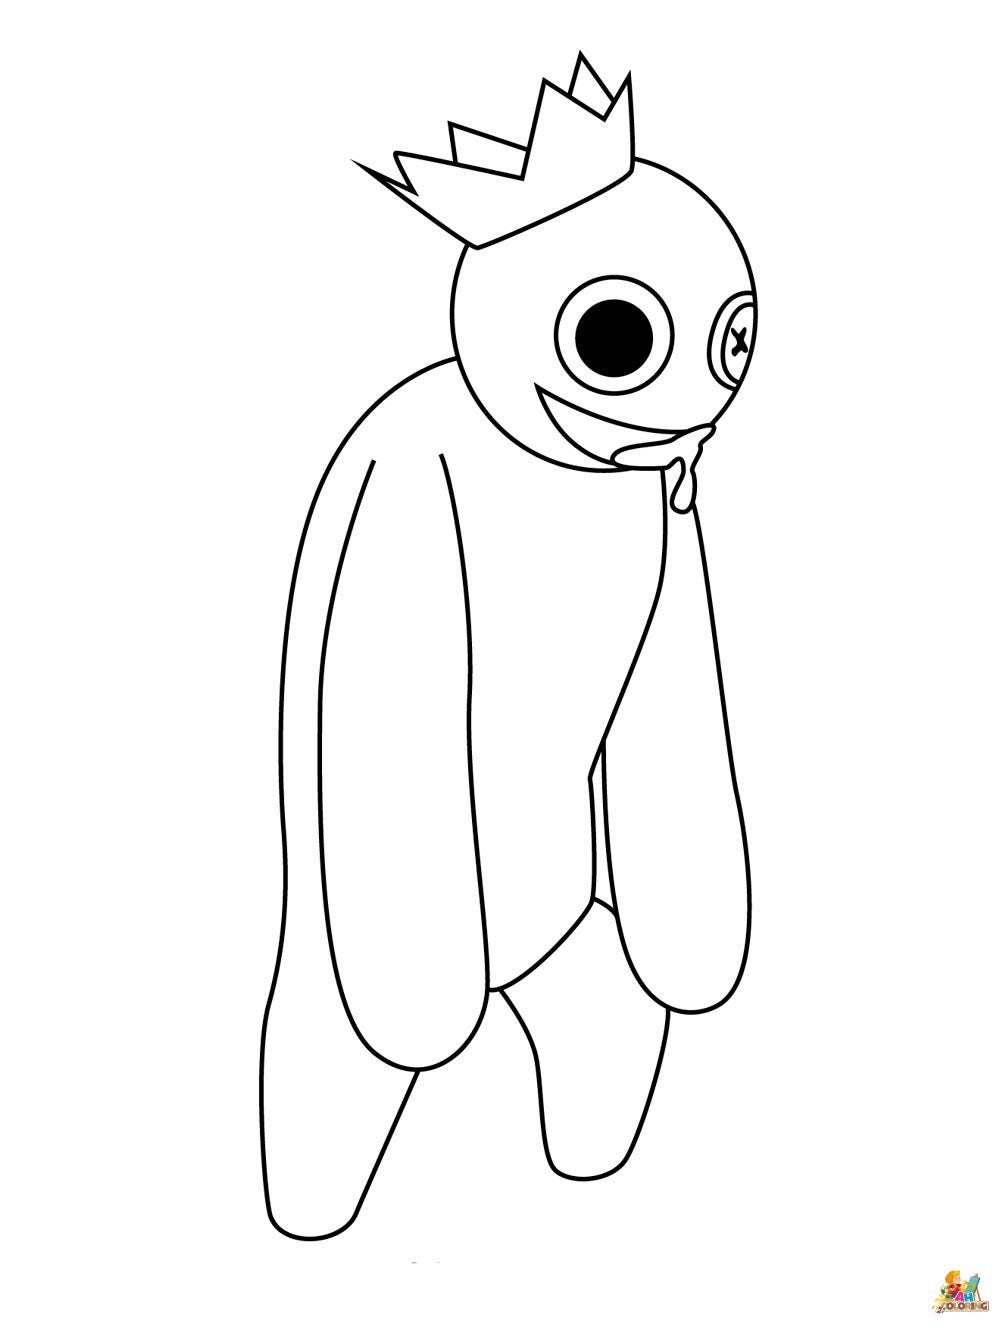 Singing Rainbow Friends Roblox coloring page